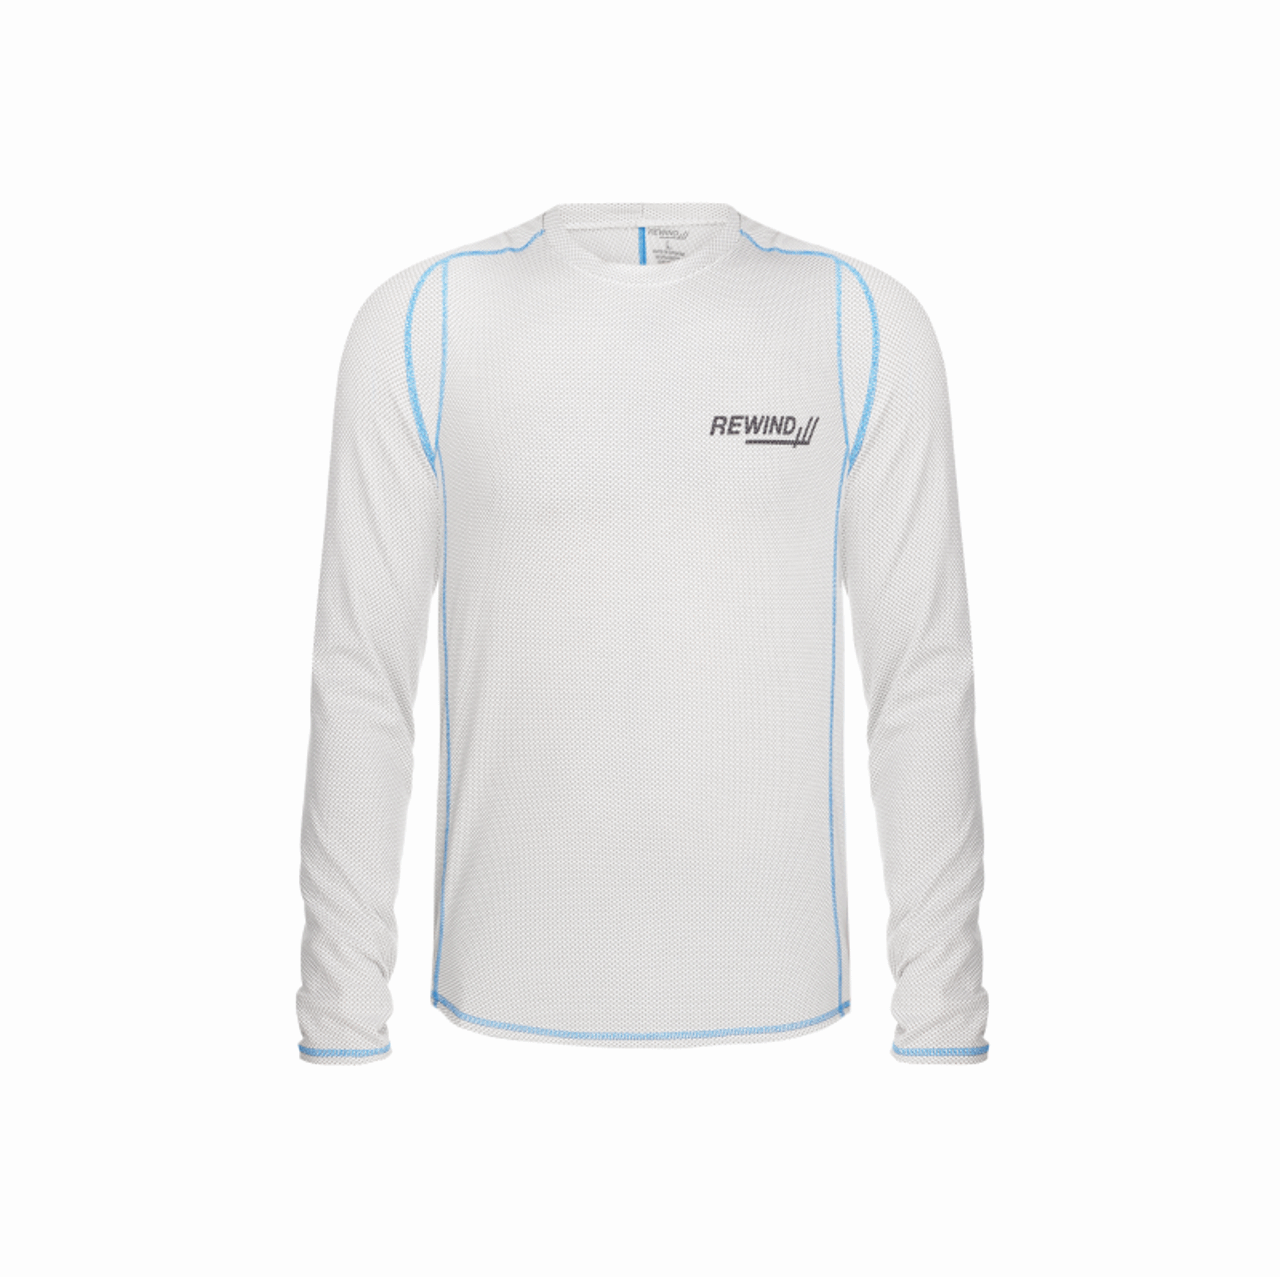 White long sleeves cooling shirt without zip from REwind